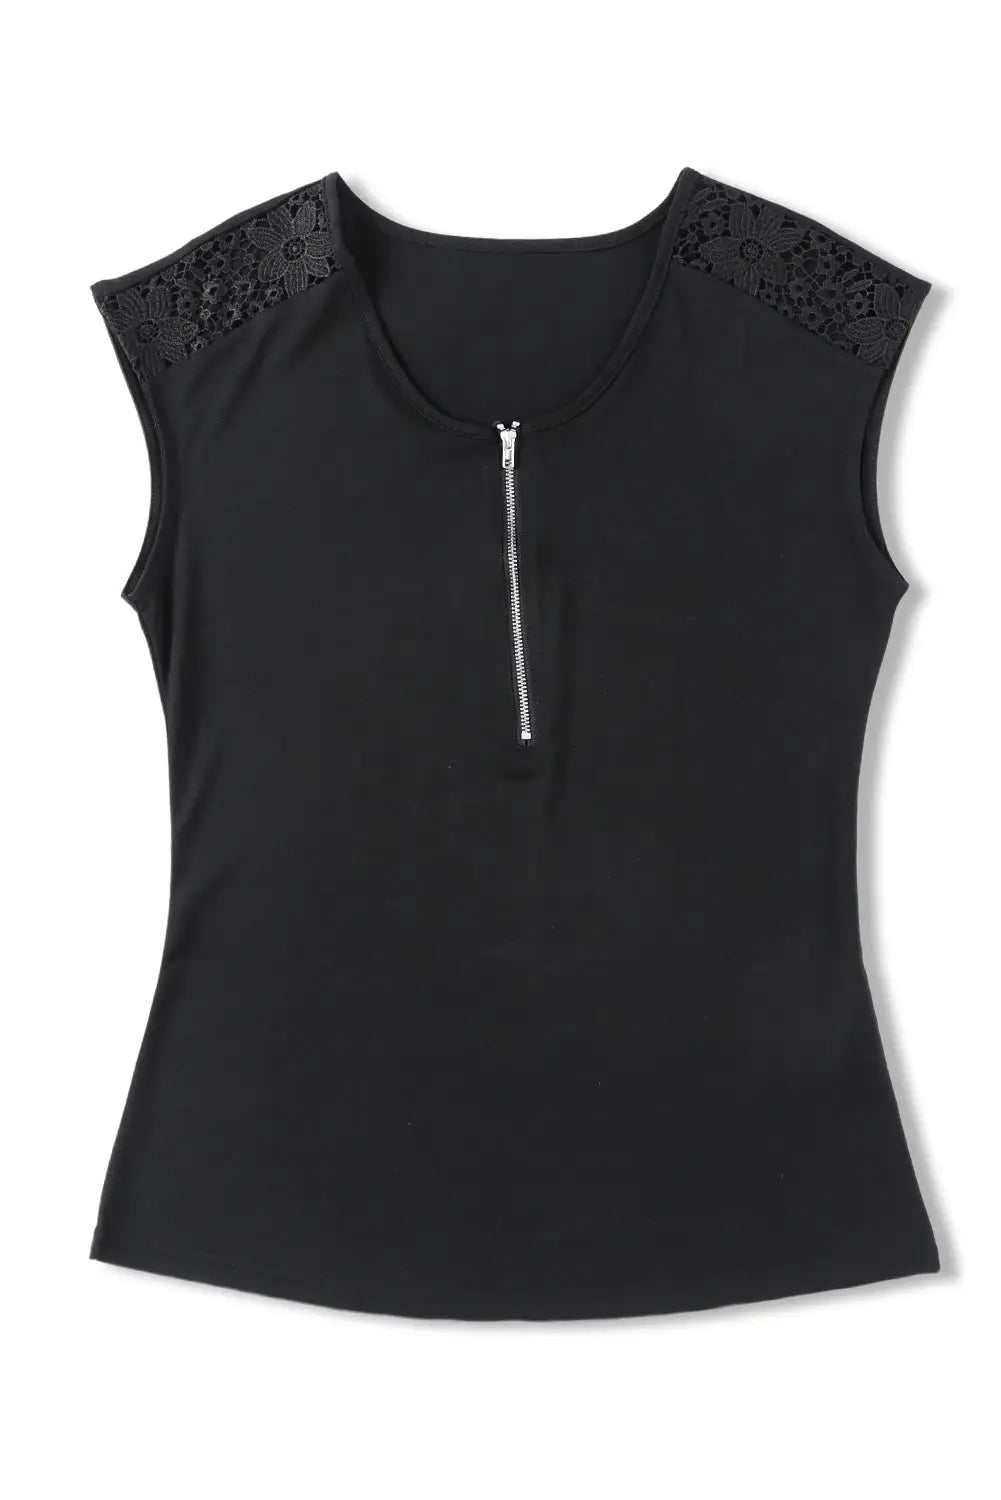 Black zip neck lace splicing tee - t-shirts